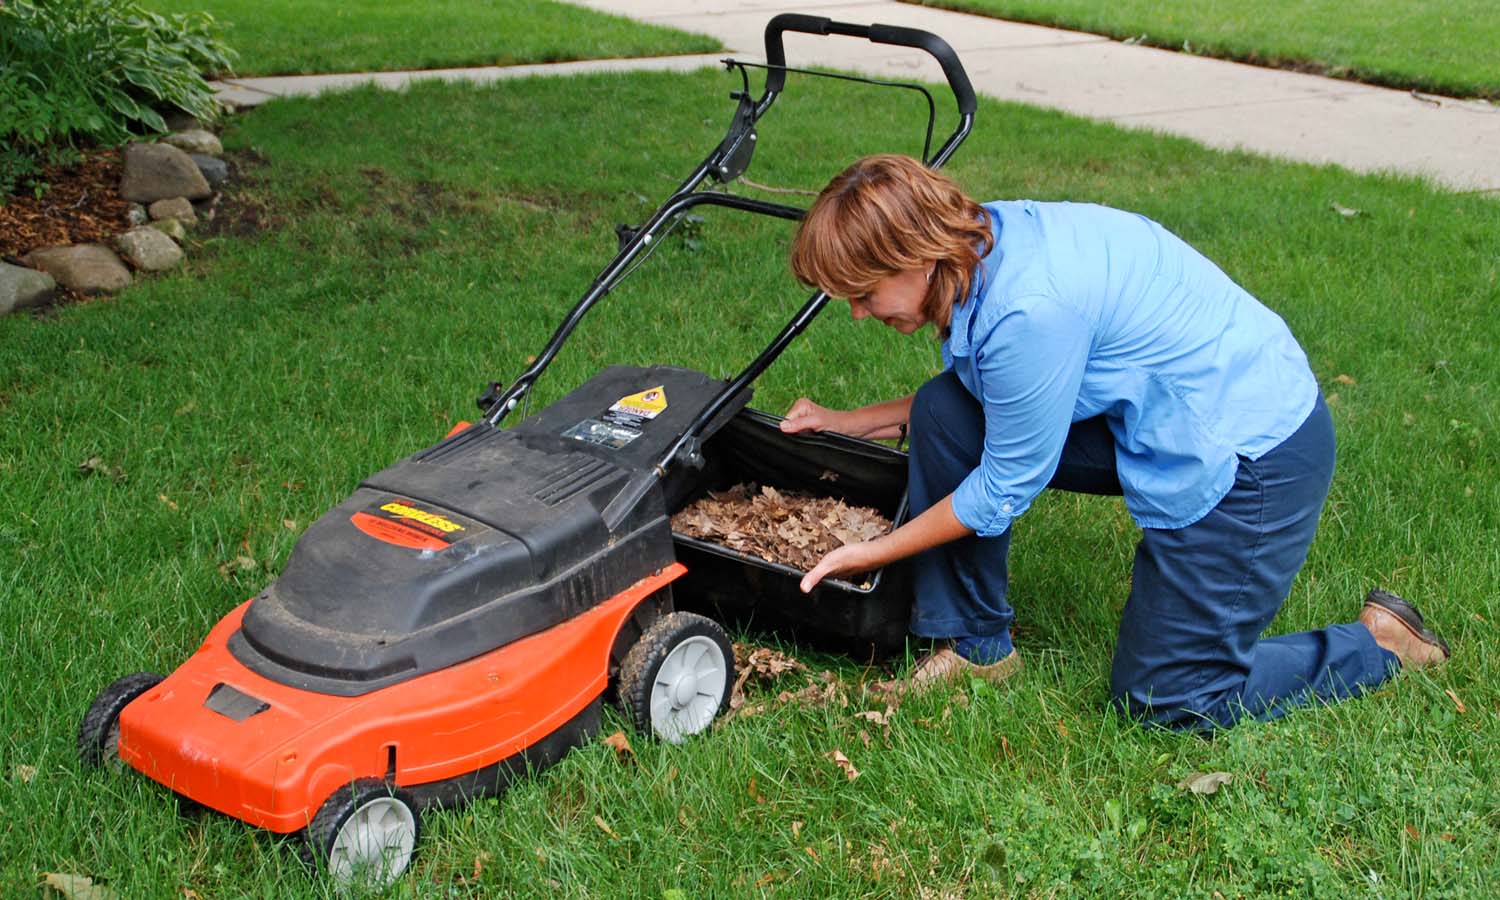 Shredding fall leaves with a mower and spreading a layer over the soil in the garden will conserve moisture and insulate the roots of perennial plants.Photo/Melinda Myers, LLC